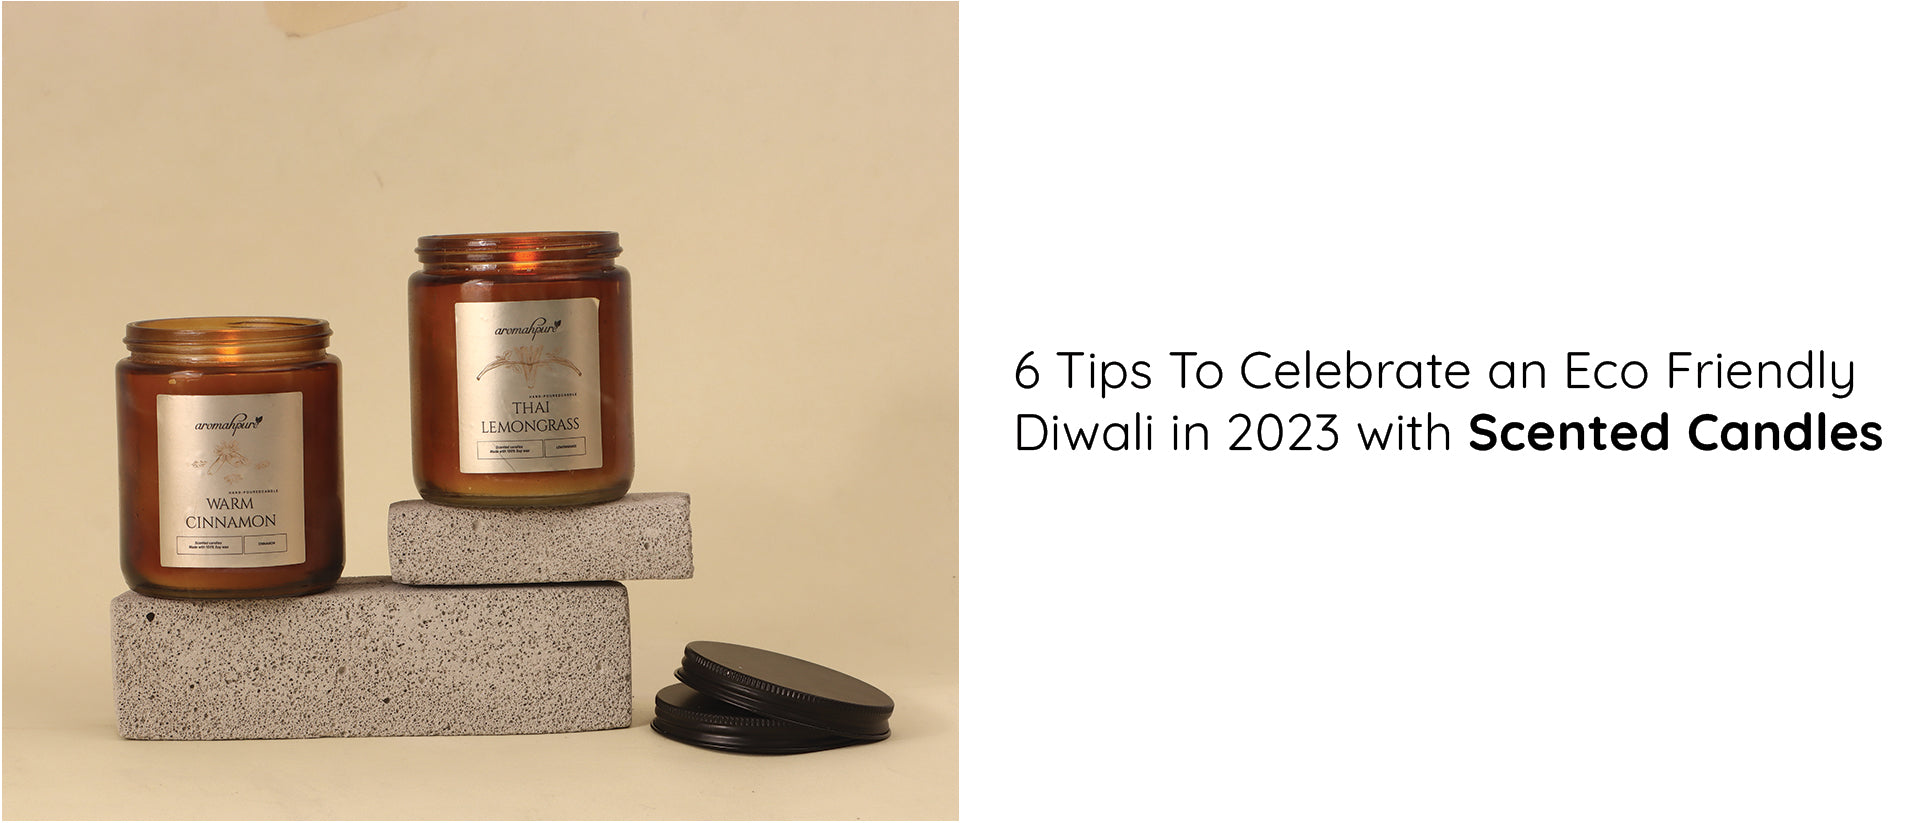 6 Tips To Celebrate an Eco Friendly Diwali in 2023 with Scented Candles : Green Diwali